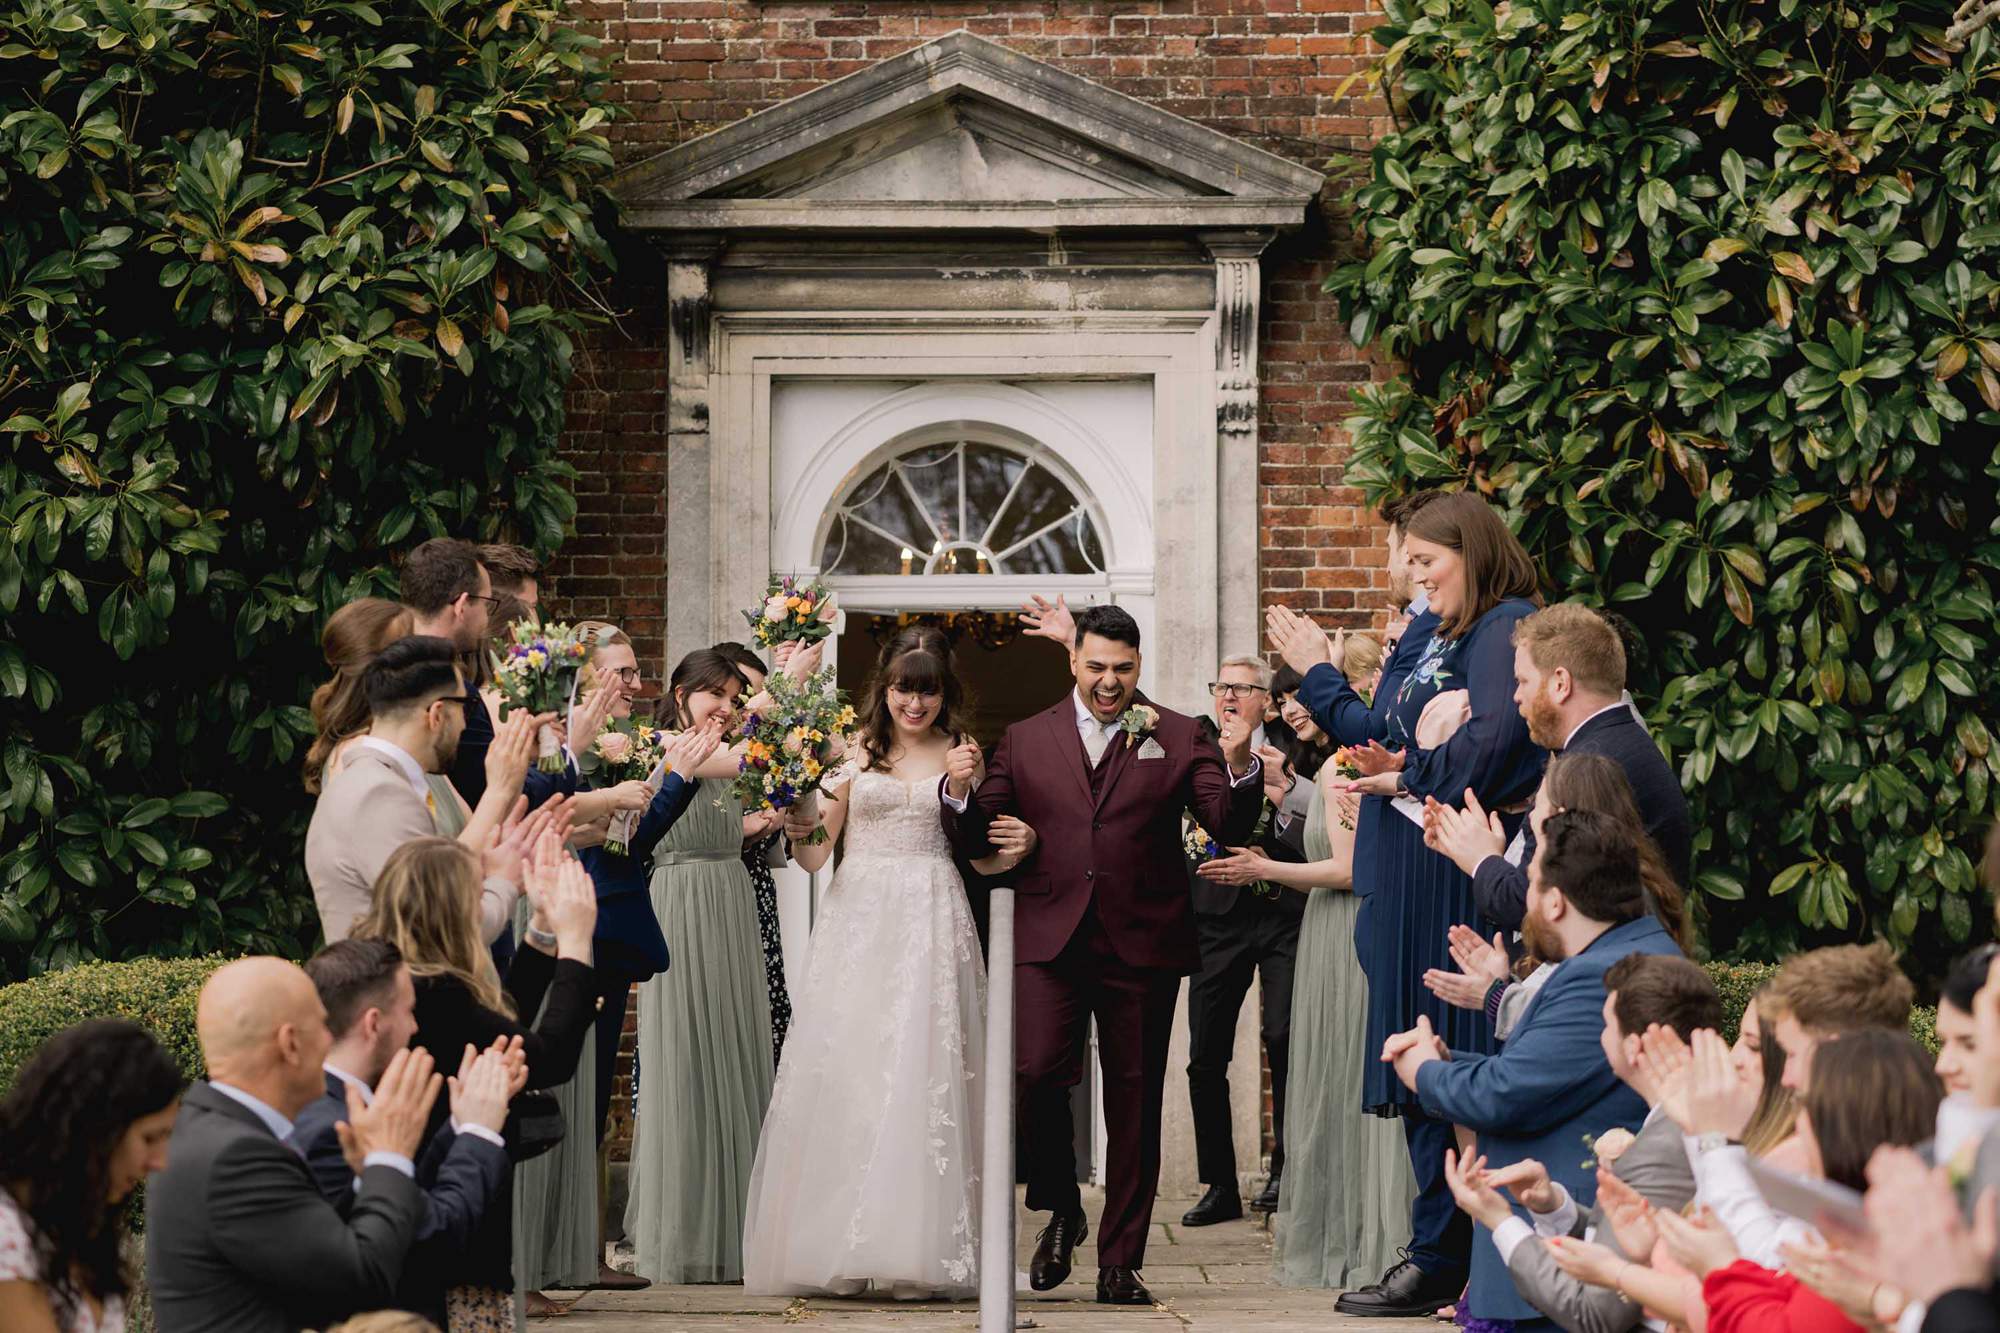 Wedding guests throw confetti at the bride and groom on their wedding day at Pelham House in East Sussex.